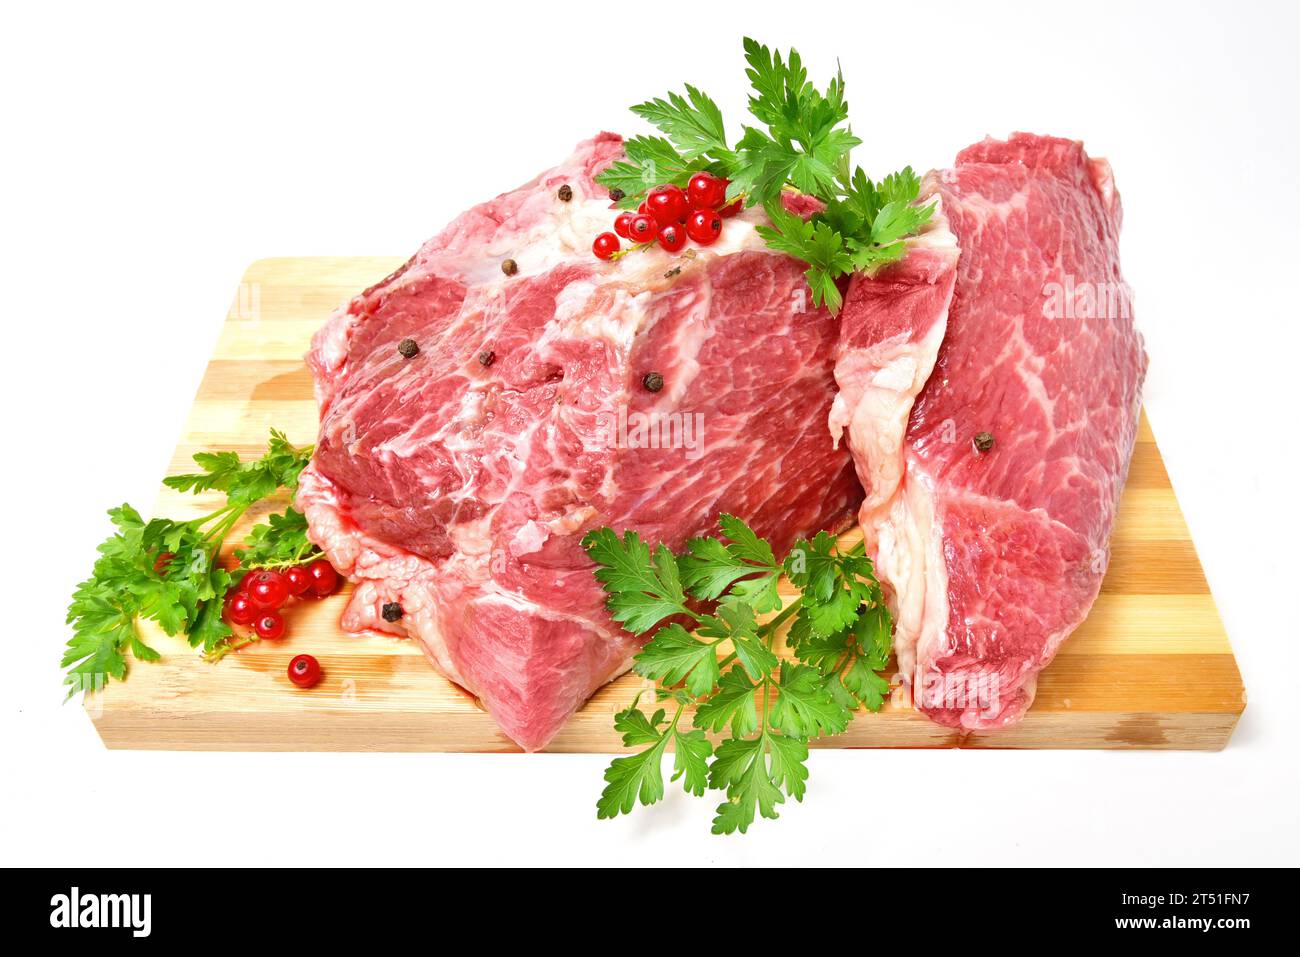 https://c8.alamy.com/comp/2T51FN7/piece-of-raw-meat-ready-for-cooking-on-a-wooden-chopping-board-isolated-on-a-white-background-2T51FN7.jpg